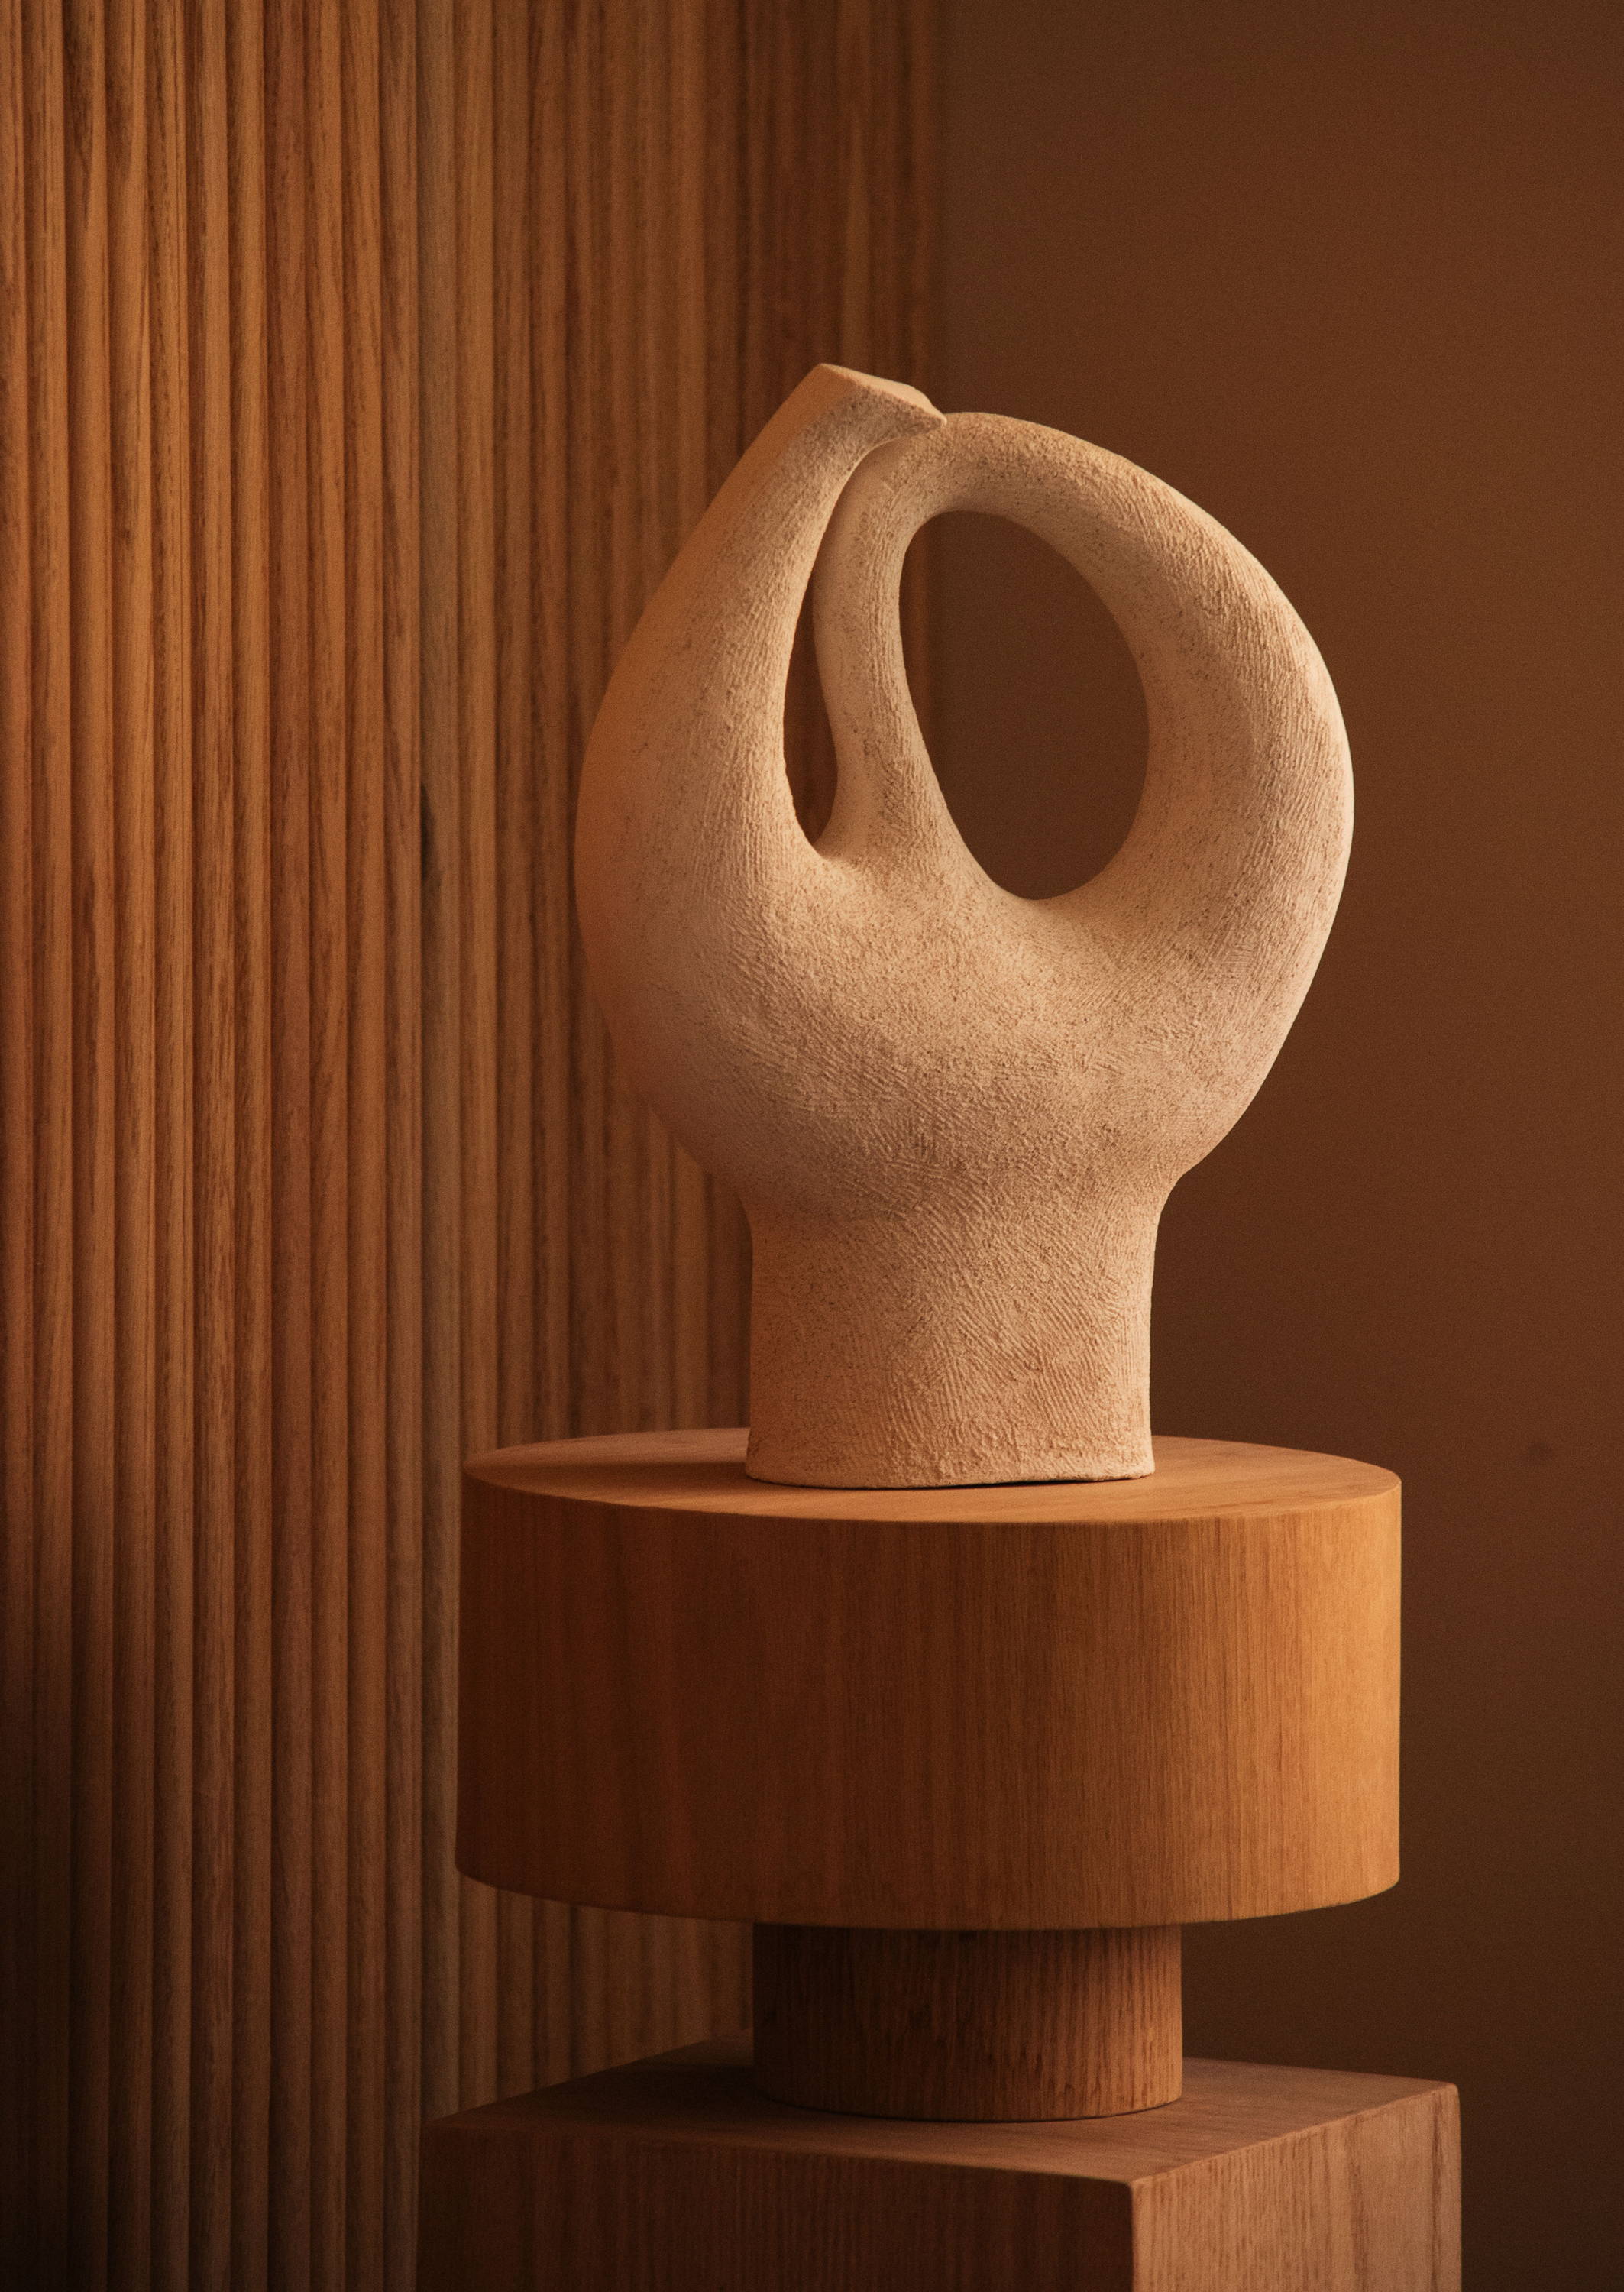 one of a kind ceramic sculpture organic form raw finished white clay in an abstract bird form by Yoona Hur